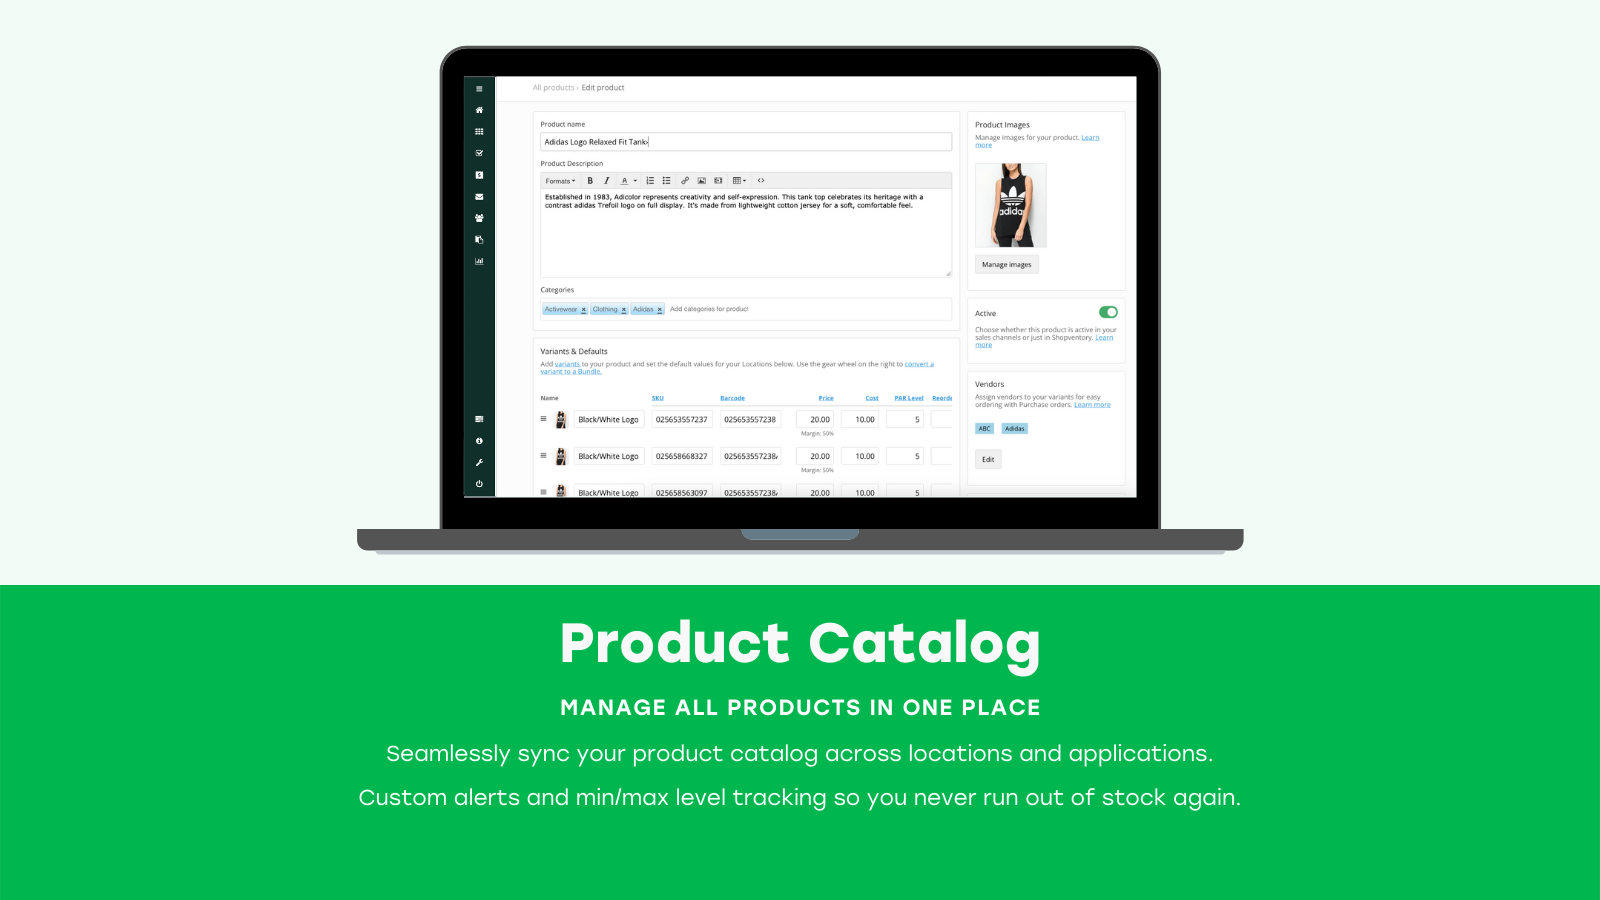 Product management system. All online